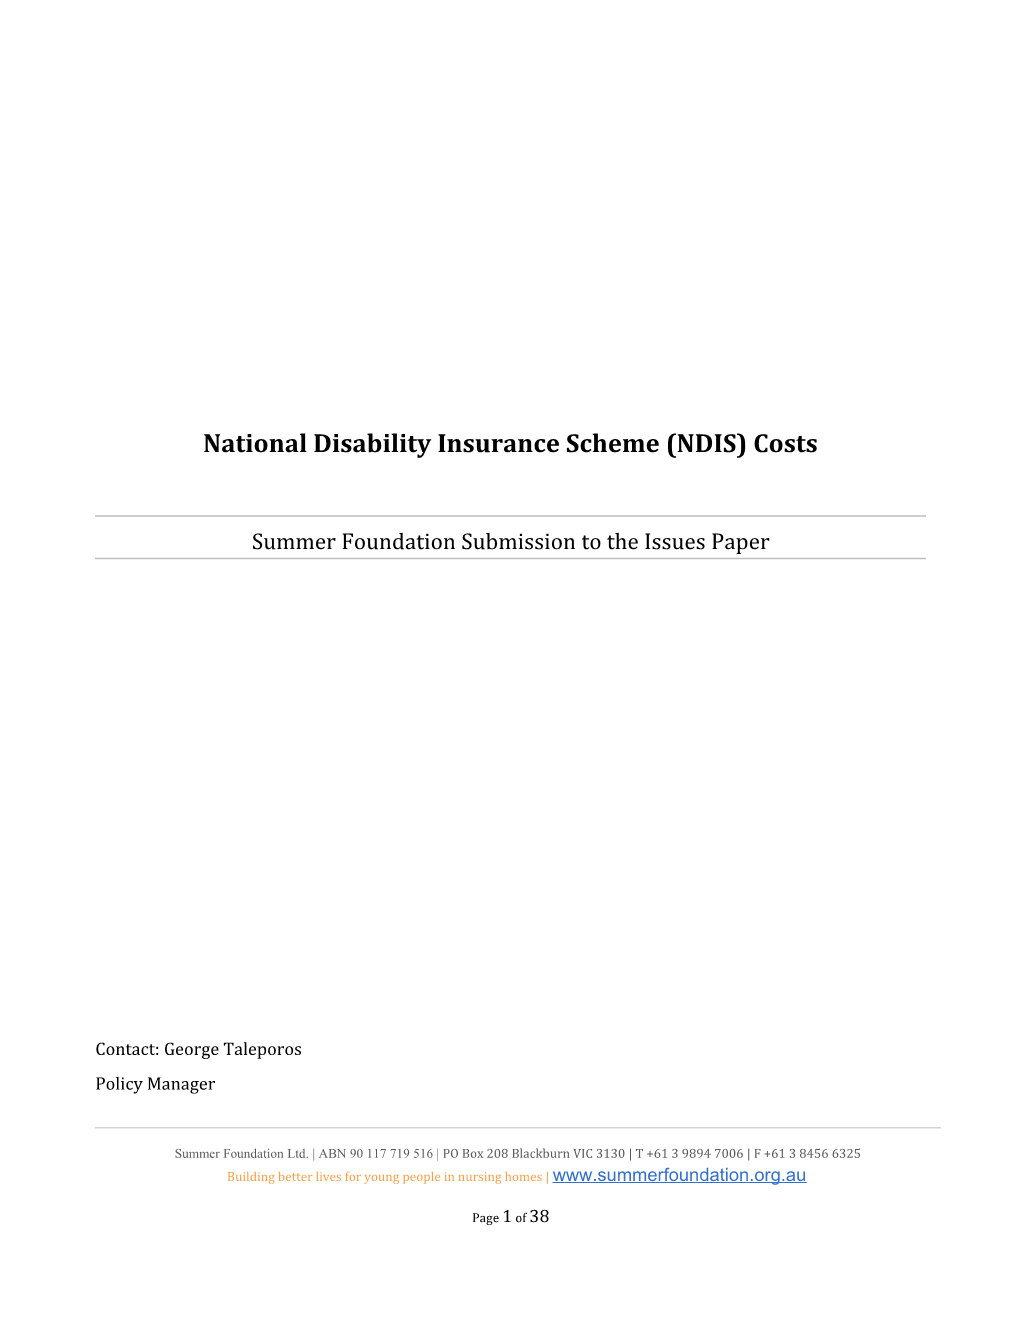 Submission 113 - Summer Foundation - National Disability Insurance Scheme (NDIS) Costs